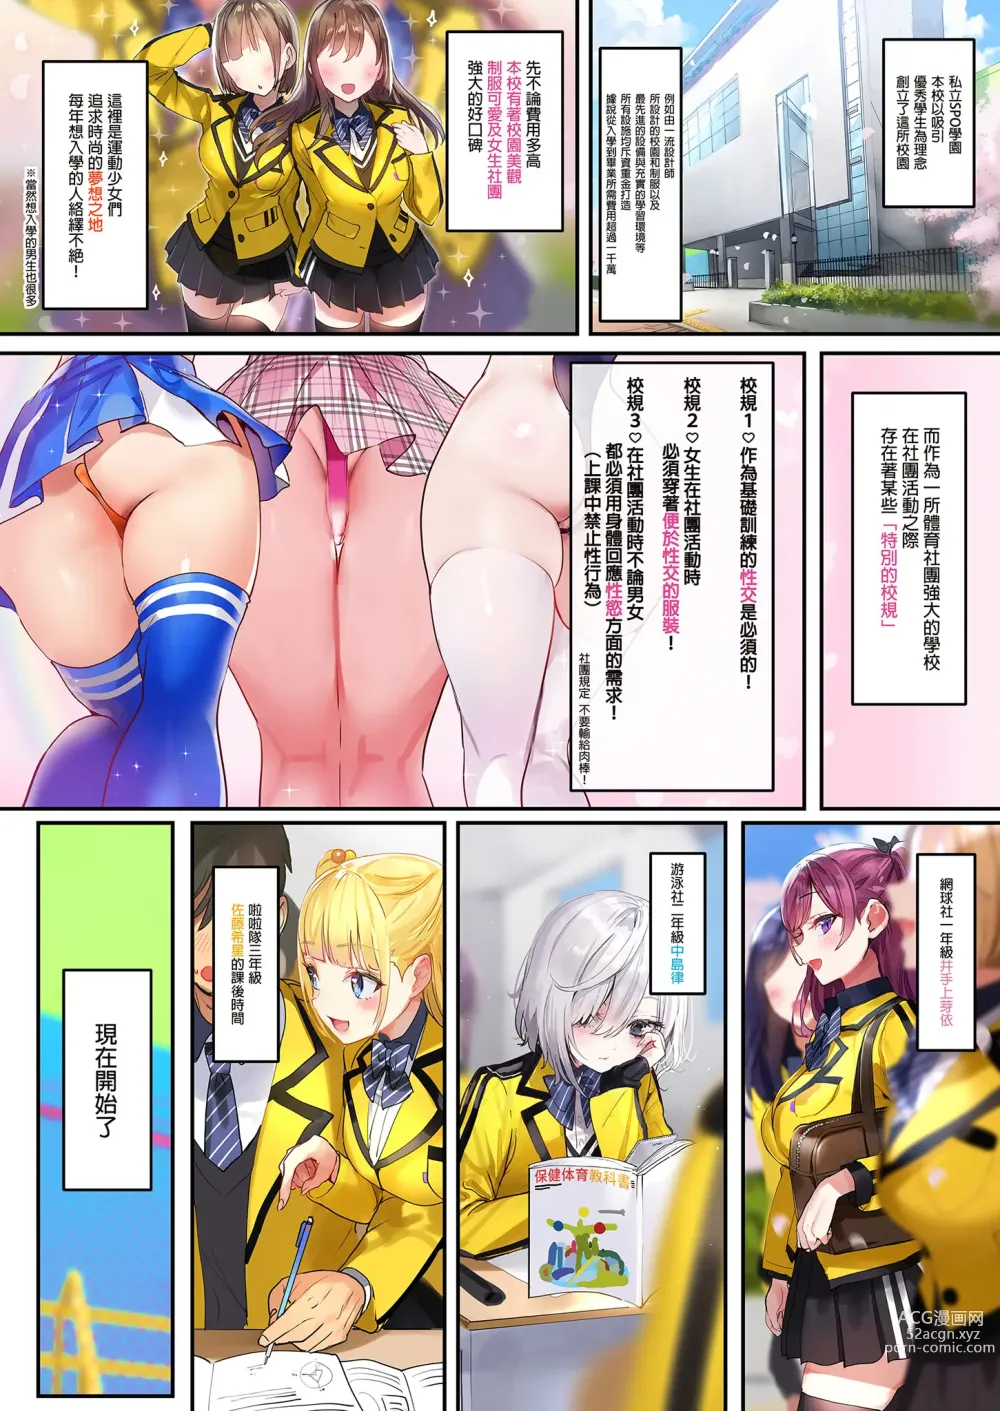 Page 5 of doujinshi 愛上運動1,2,3! (decensored)